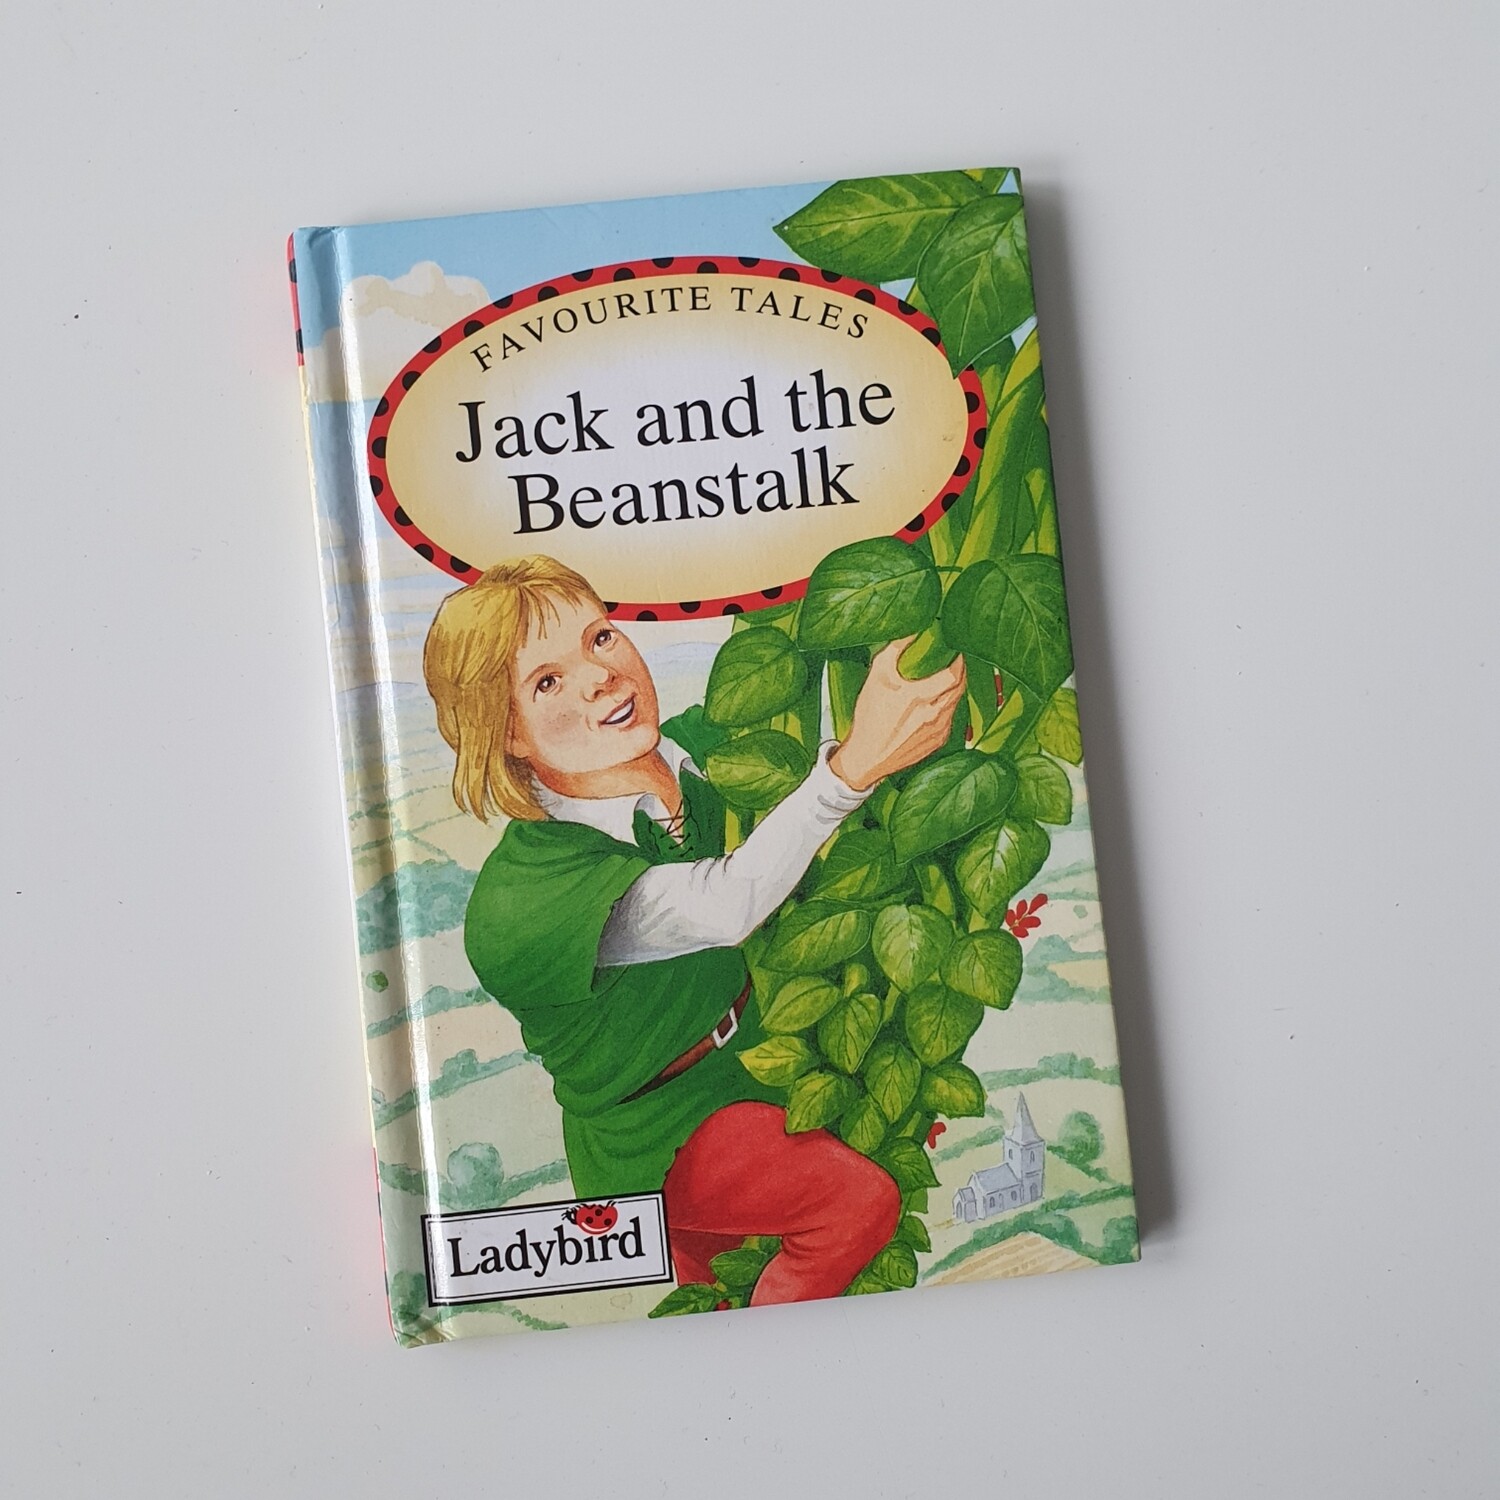 Jack and the Beanstalk Notebook